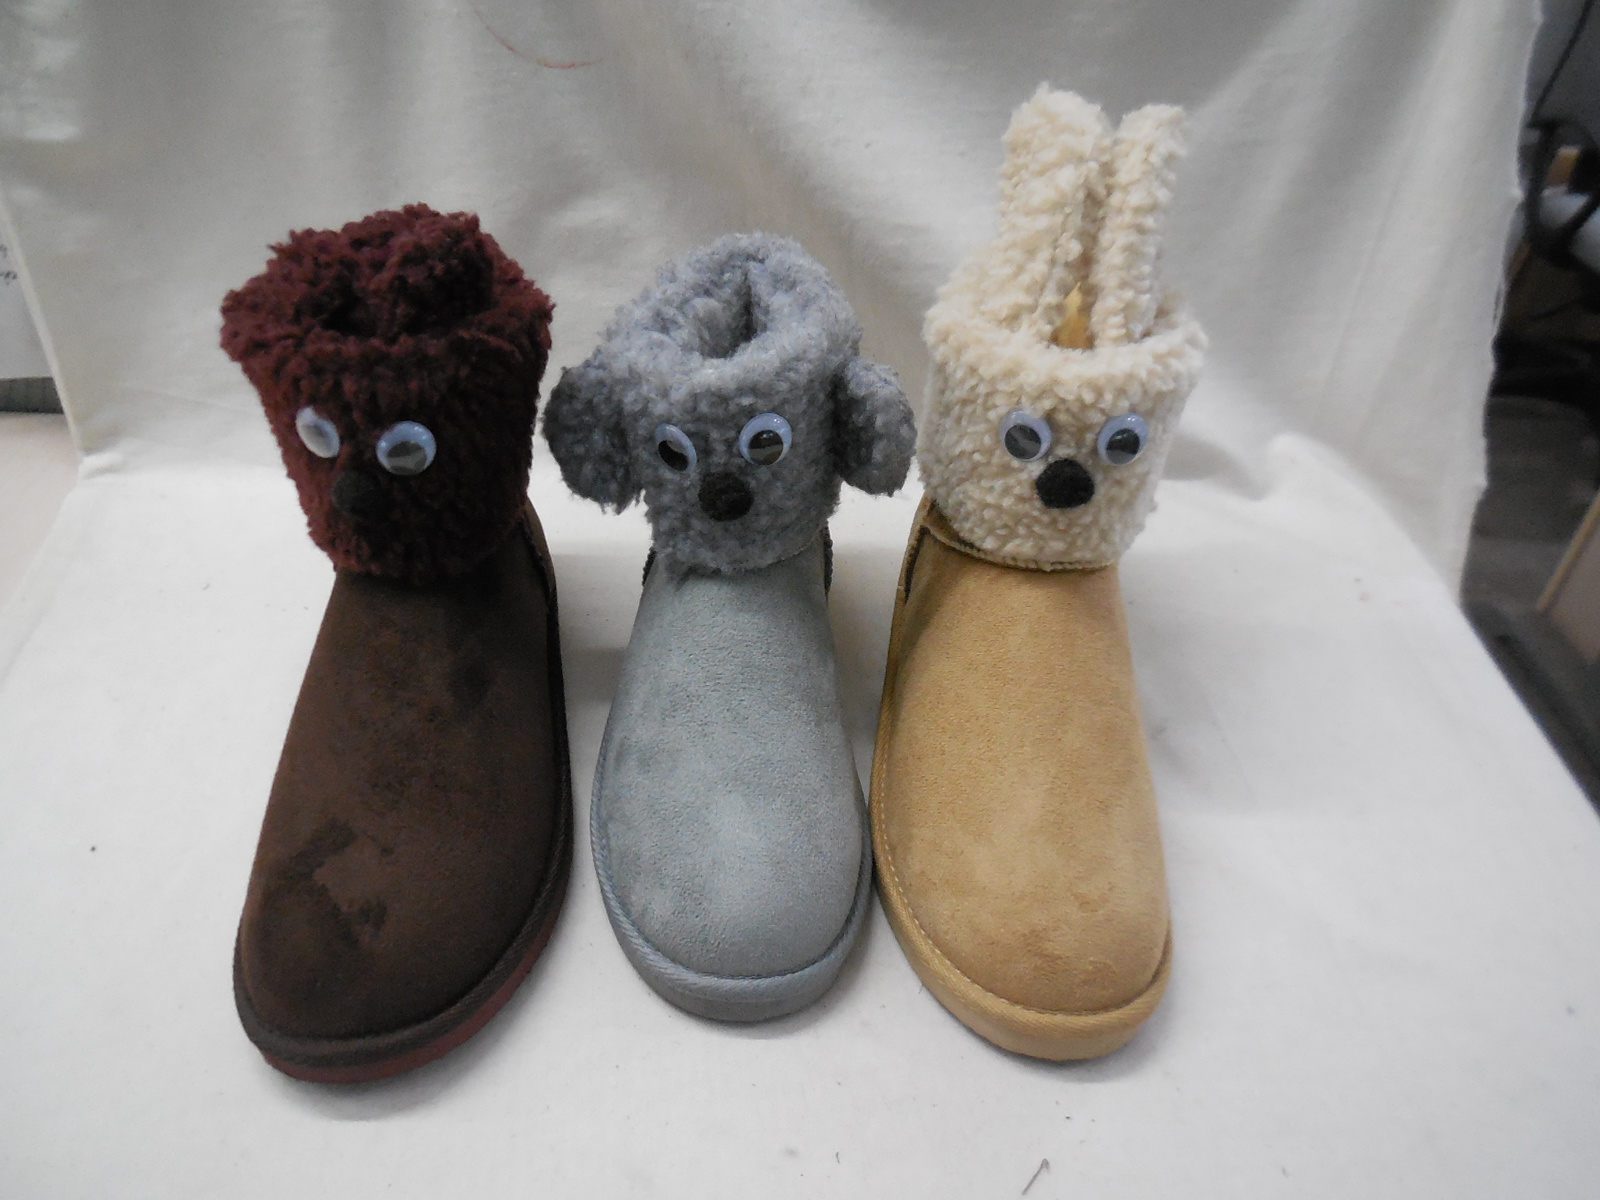 Womens Microsuede Booties with Animals Styles